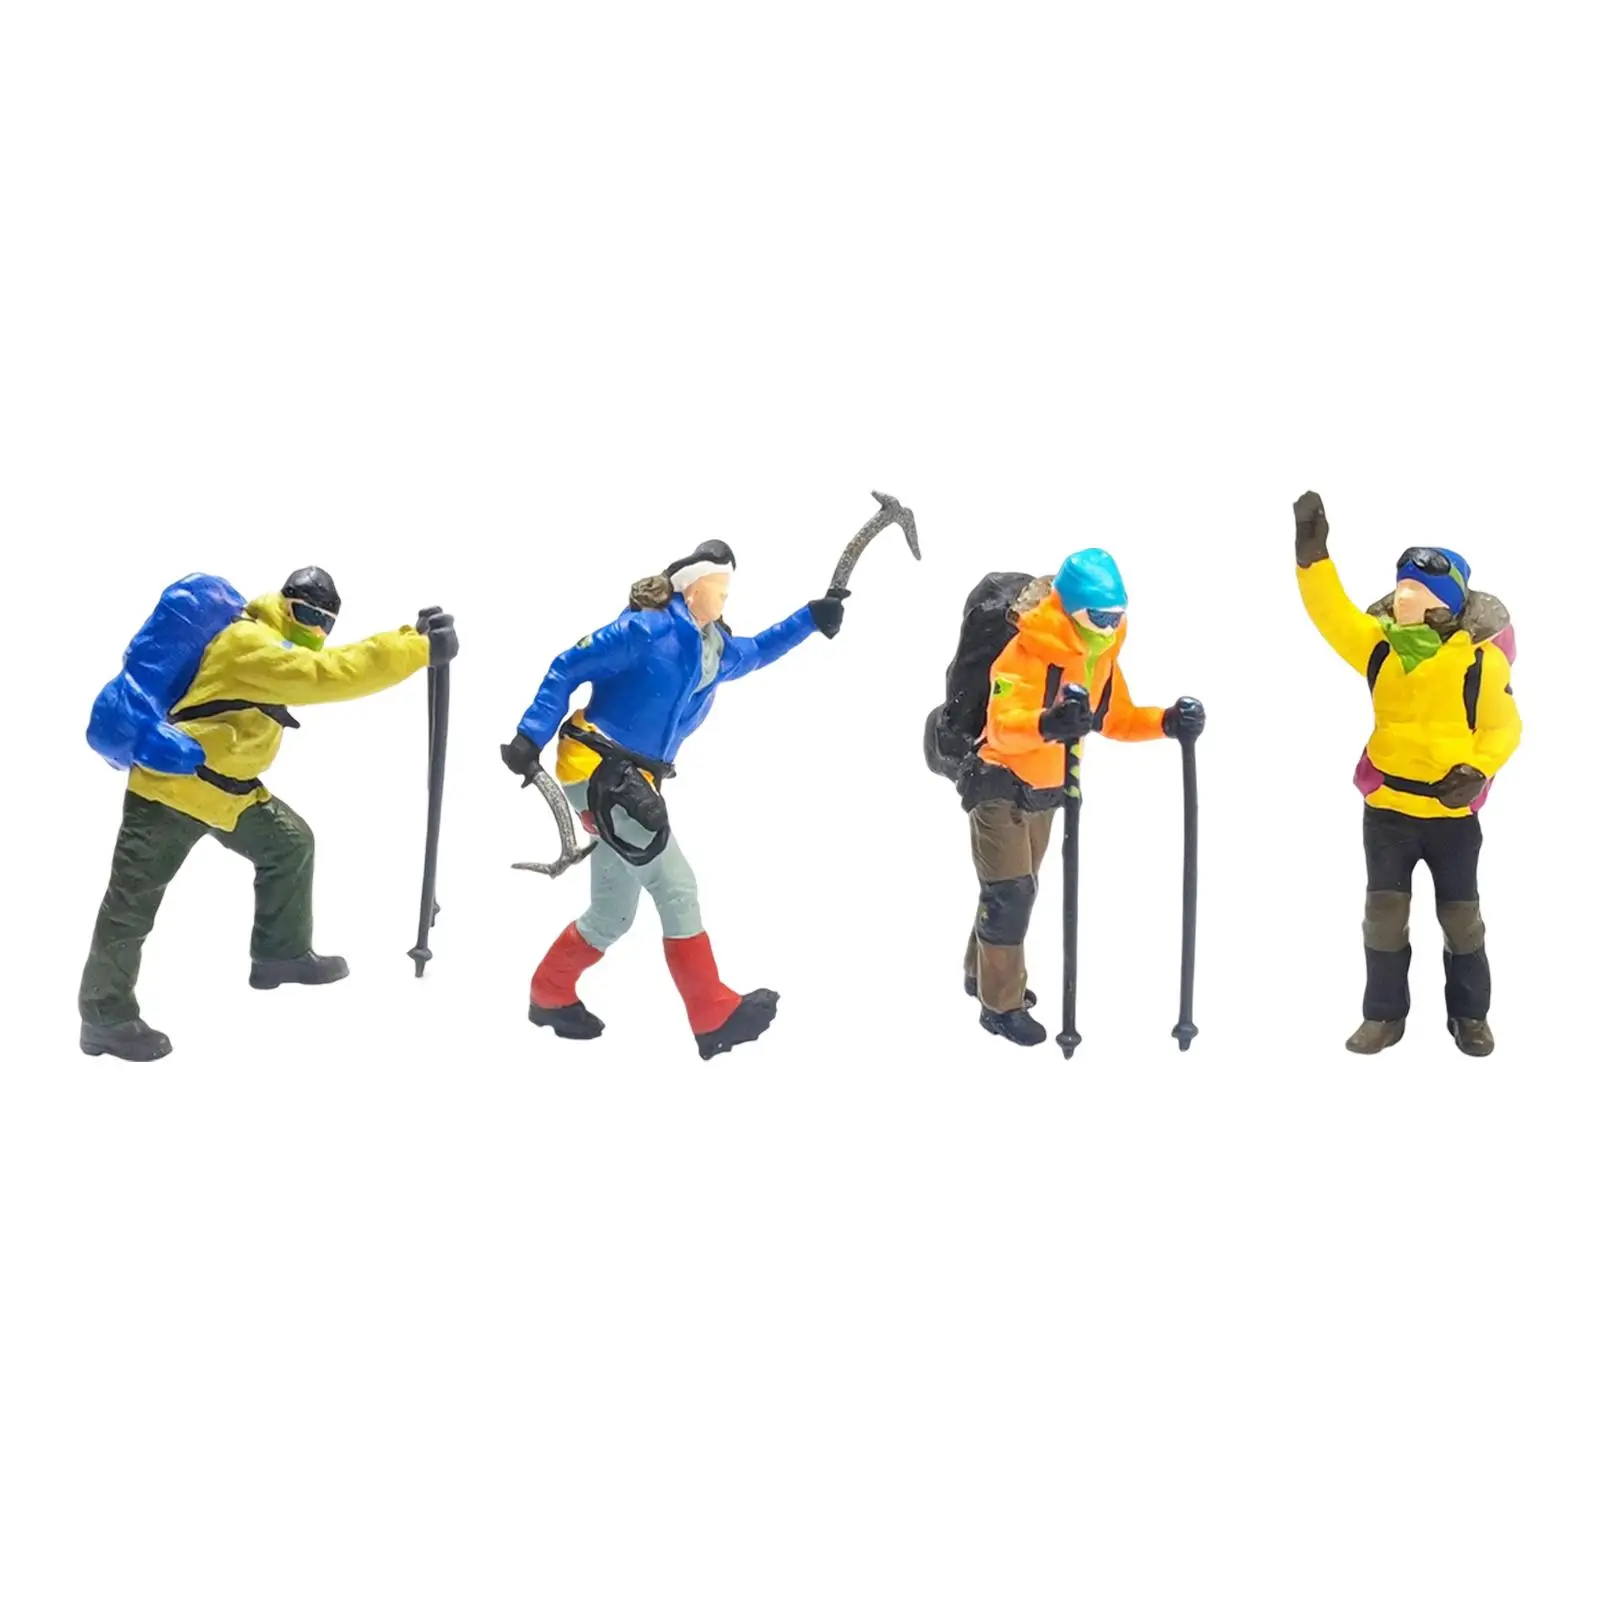 1/87 Climbing People Figures Miniature People Model Tiny People Ornament for Sand Table DIY Projects DIY Scene Layout Decoration